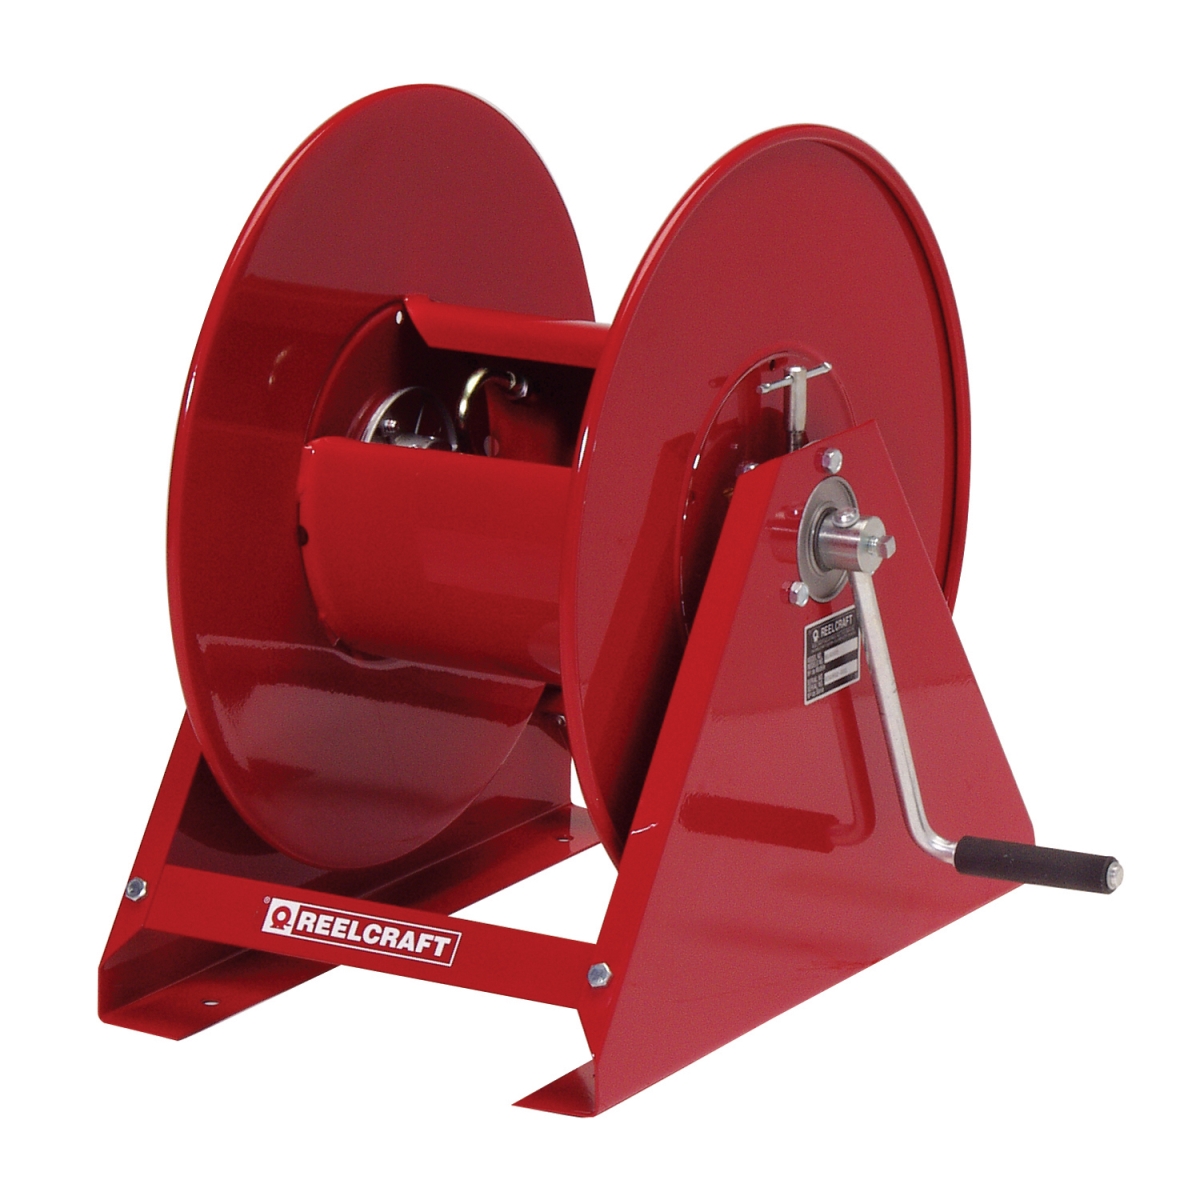 H18000 M 0.5 In. X 200 Ft. Heavy Duty 3000 Psi Oil Without Hose Reel, Red